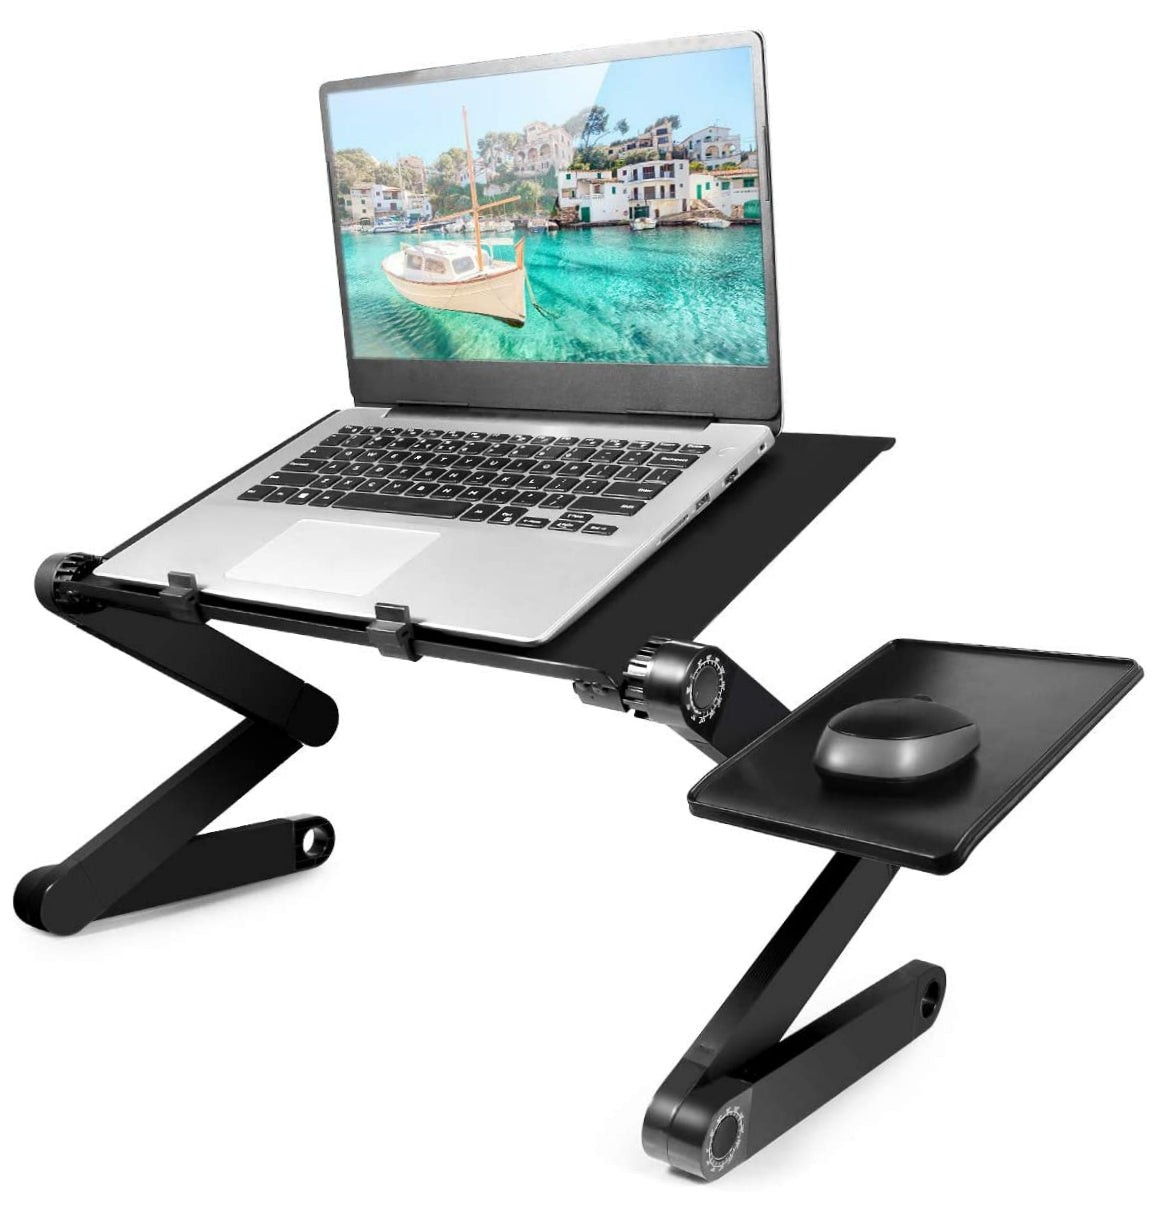 Accuratus Integer Desk - Multi Angle Height Adjustable Desk with Integrated Cooling Fans - Laptop Stand